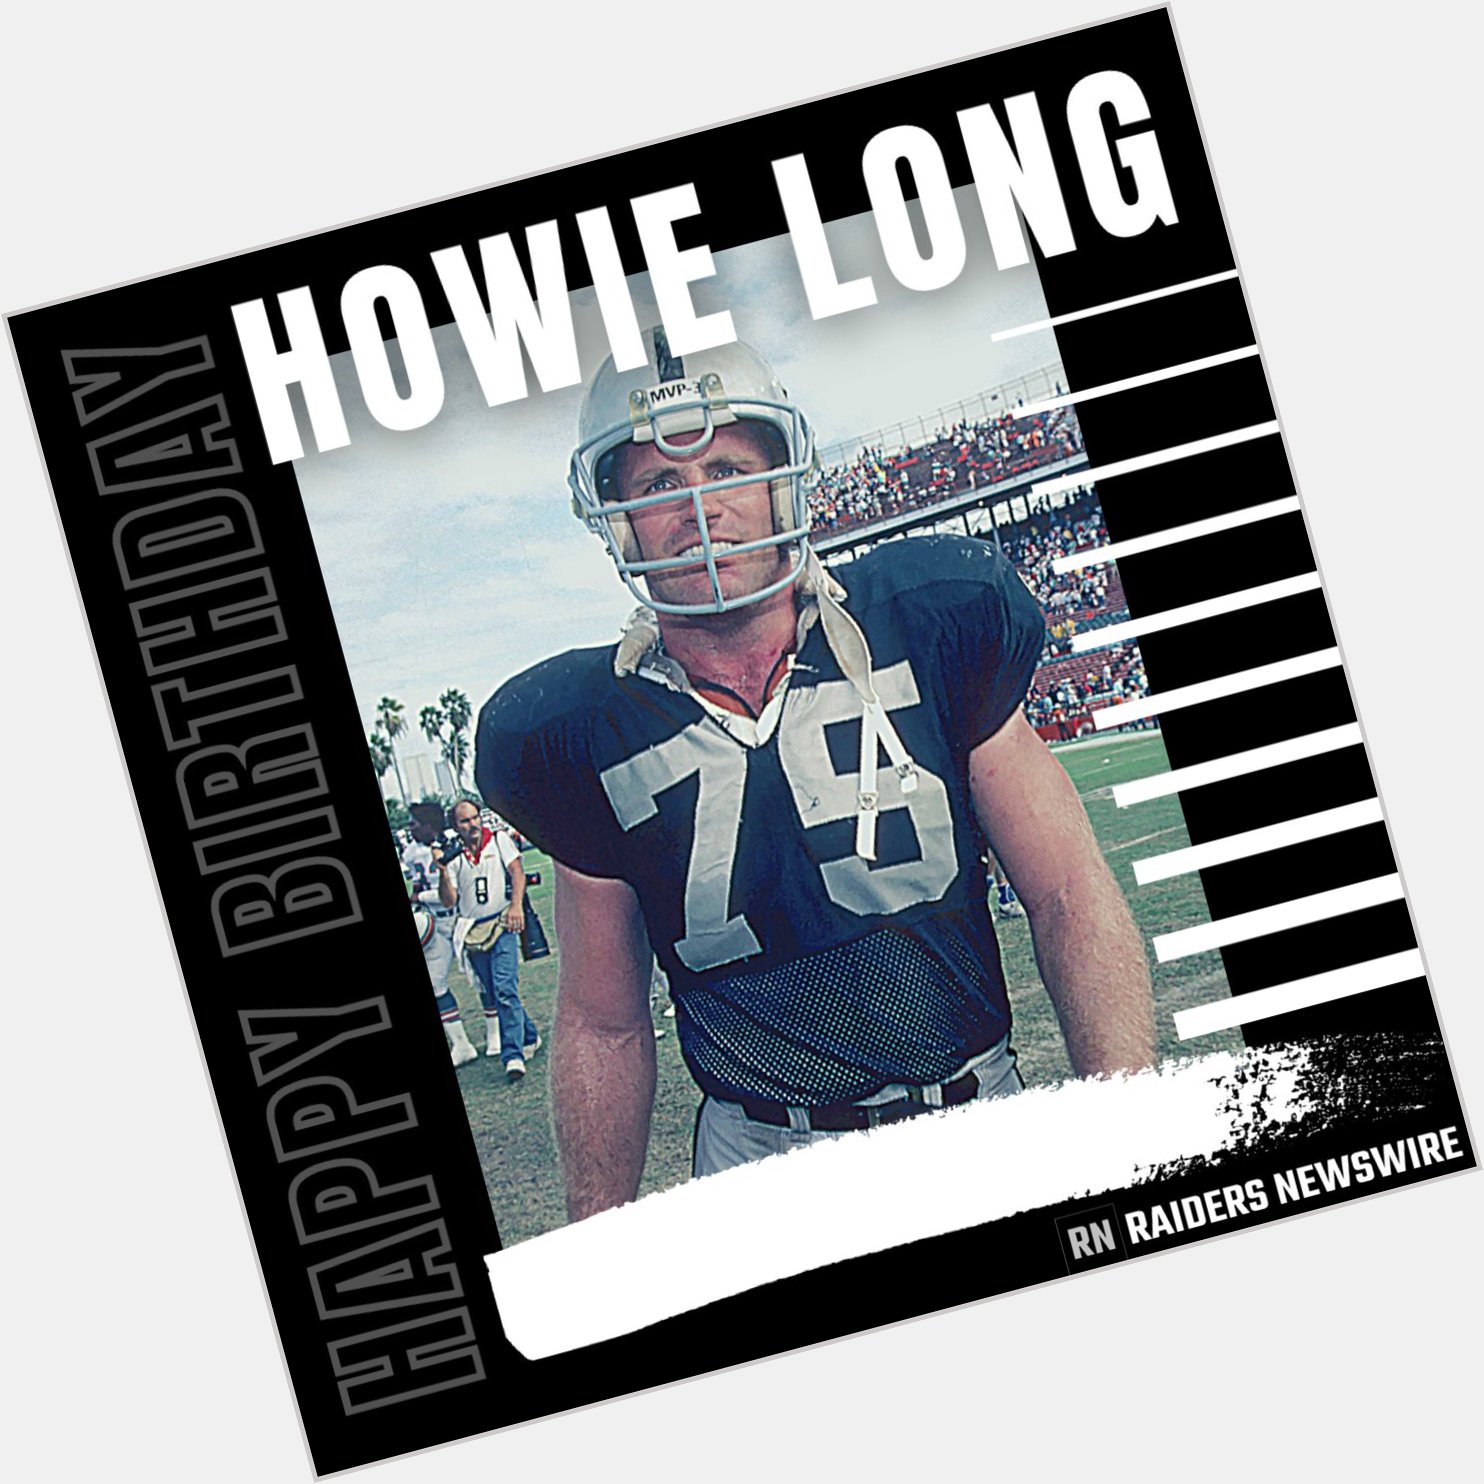 Join us in wishing a very Happy Birthday to legend and Hall of Famer, Howie Long! 